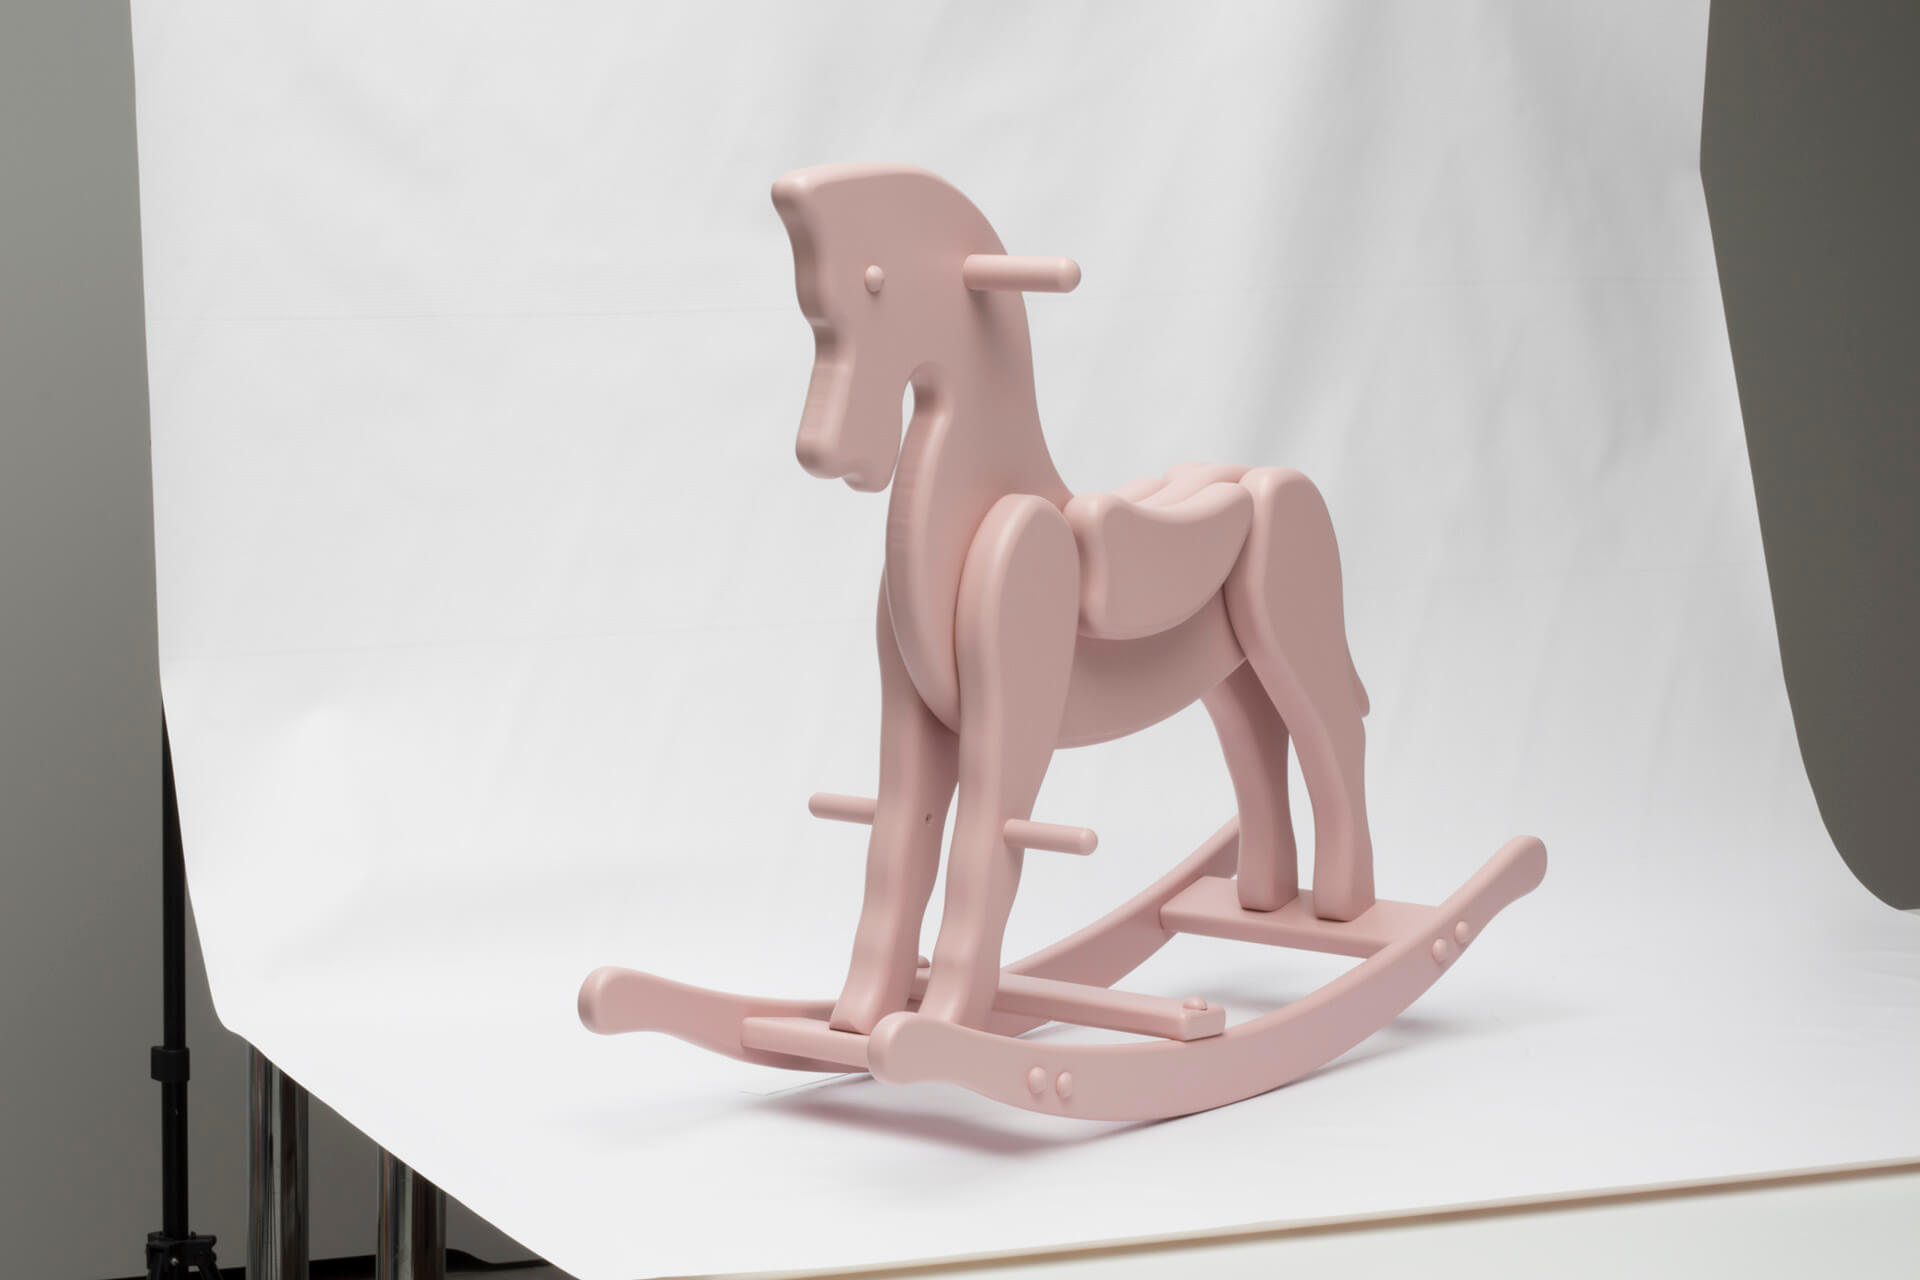 Wooden rocking horse – old-fashioned or great gift idea?